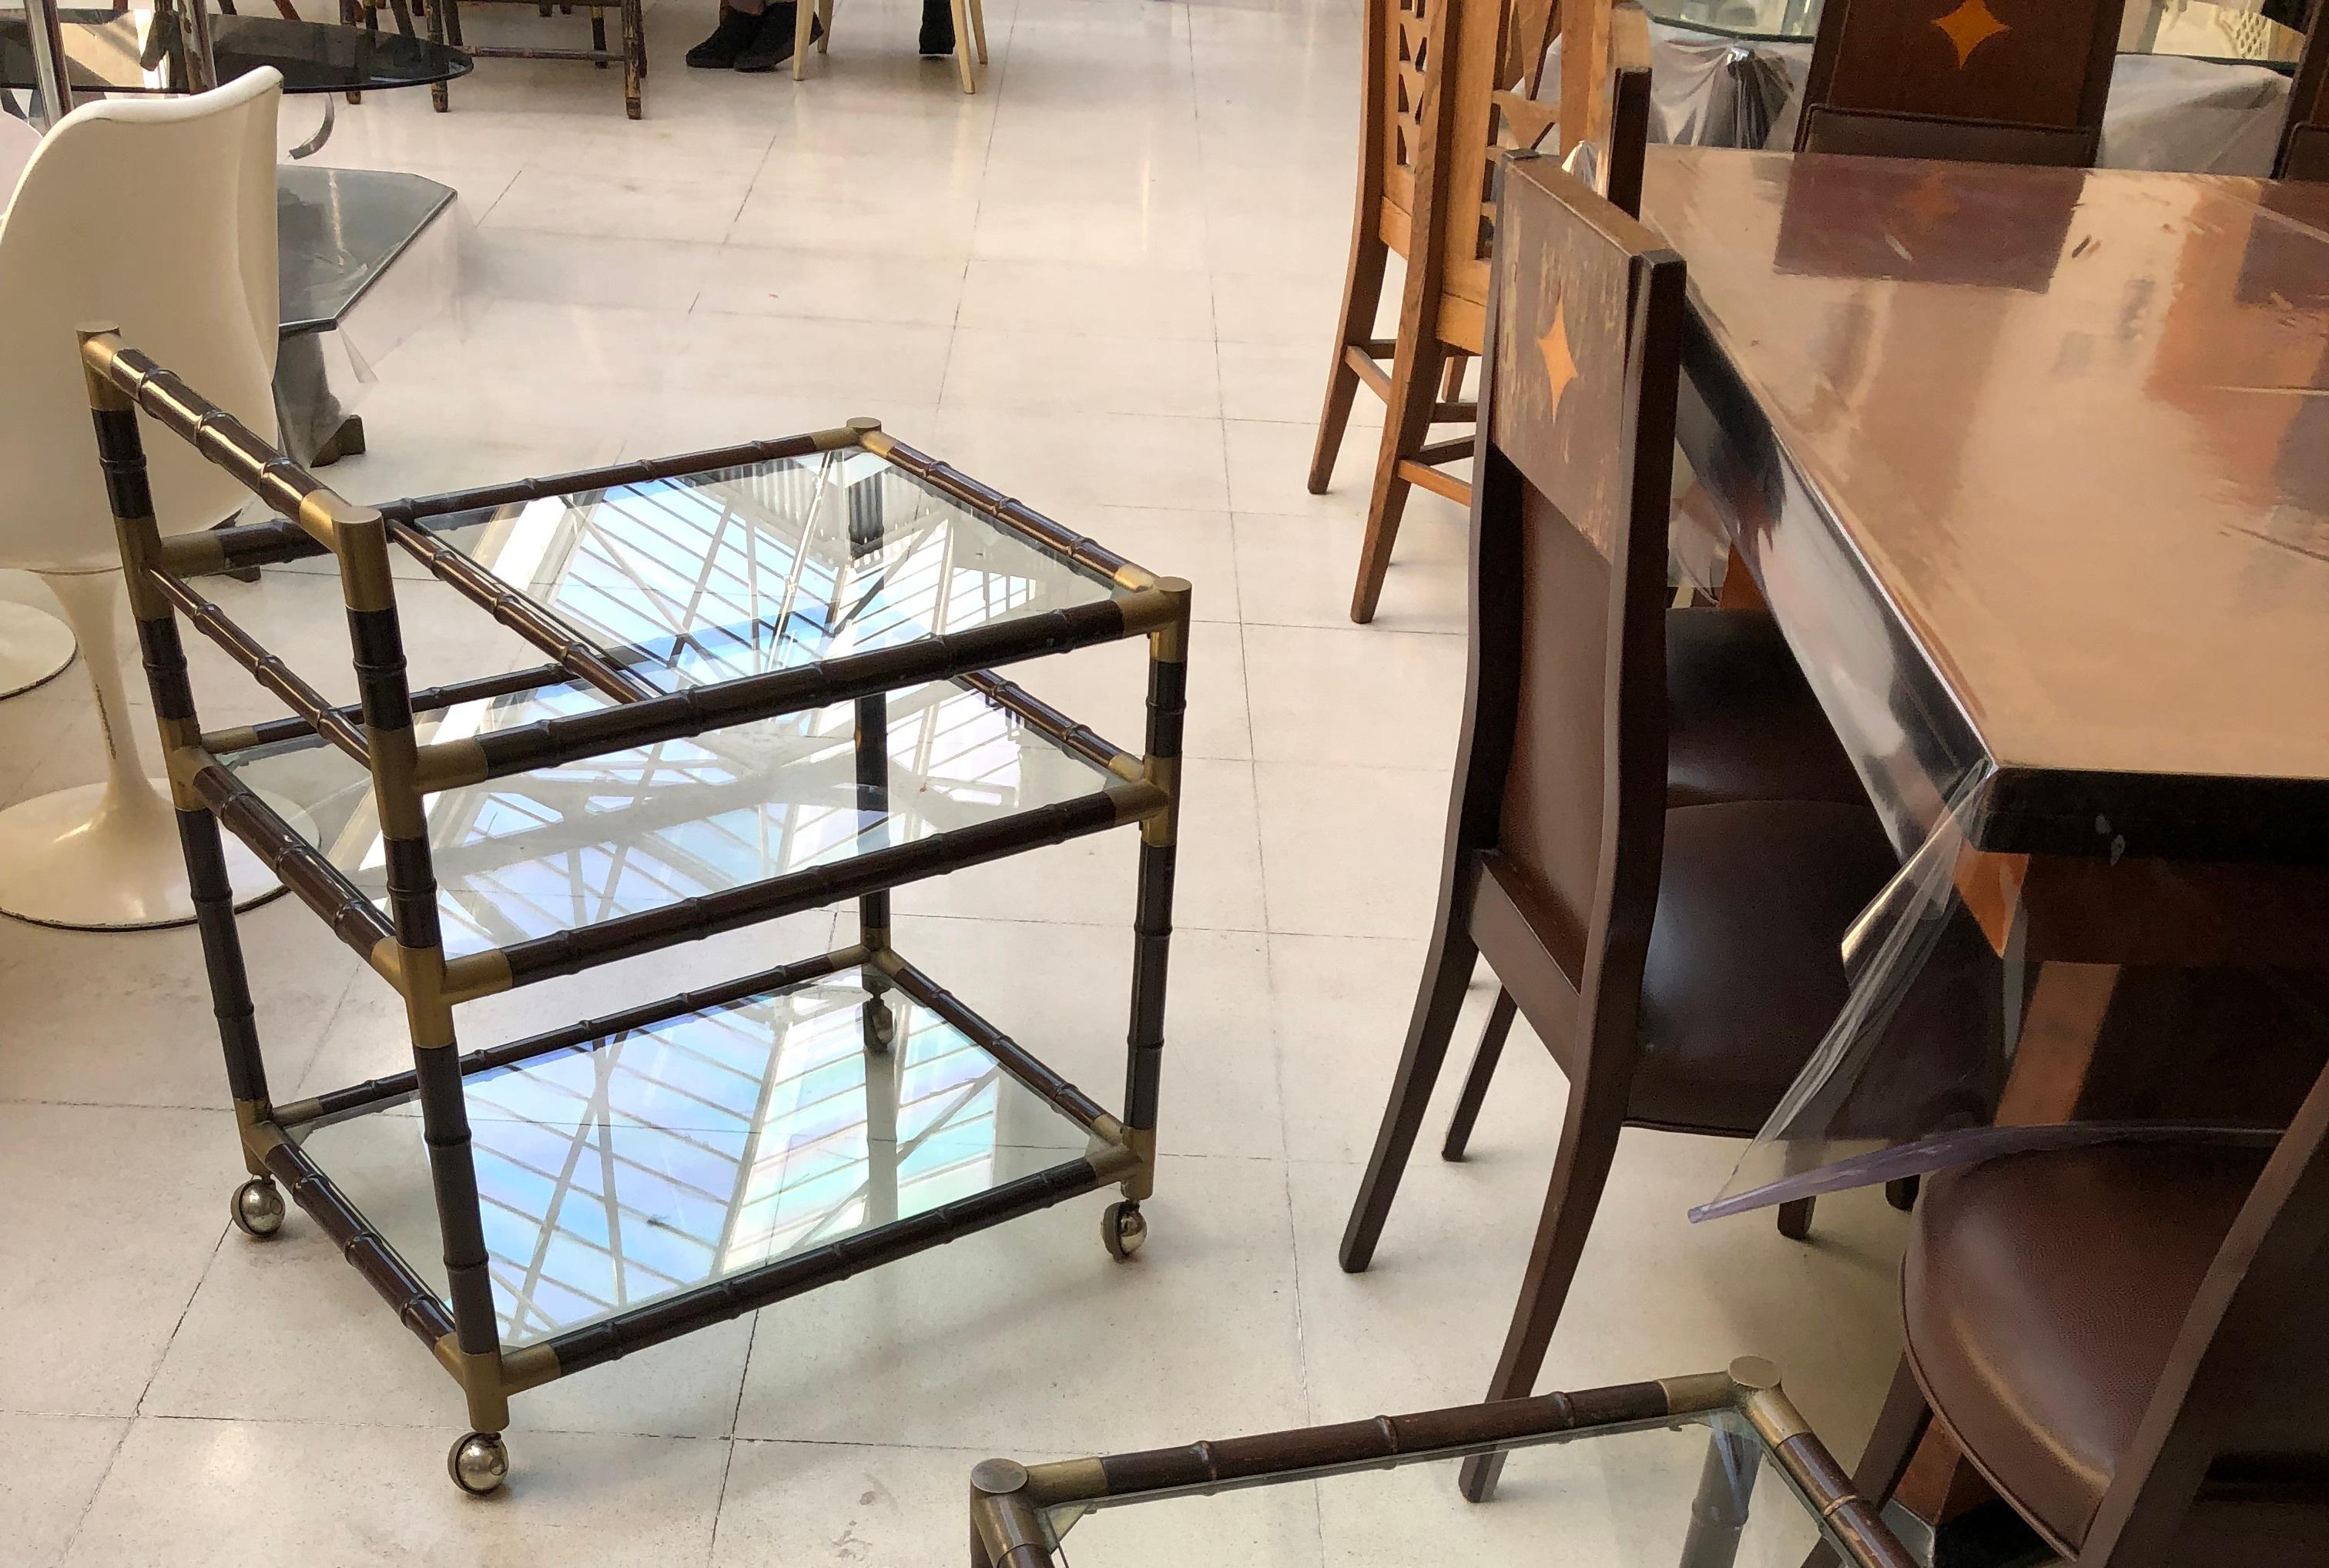 Year: 1960
Country: American
Wood and bronze
It is an elegant and sophisticated bar
We have specialized in the sale of Art Deco and Art Nouveau styles since 1982.If you have any questions we are at your disposal.
Pushing the button that reads 'View